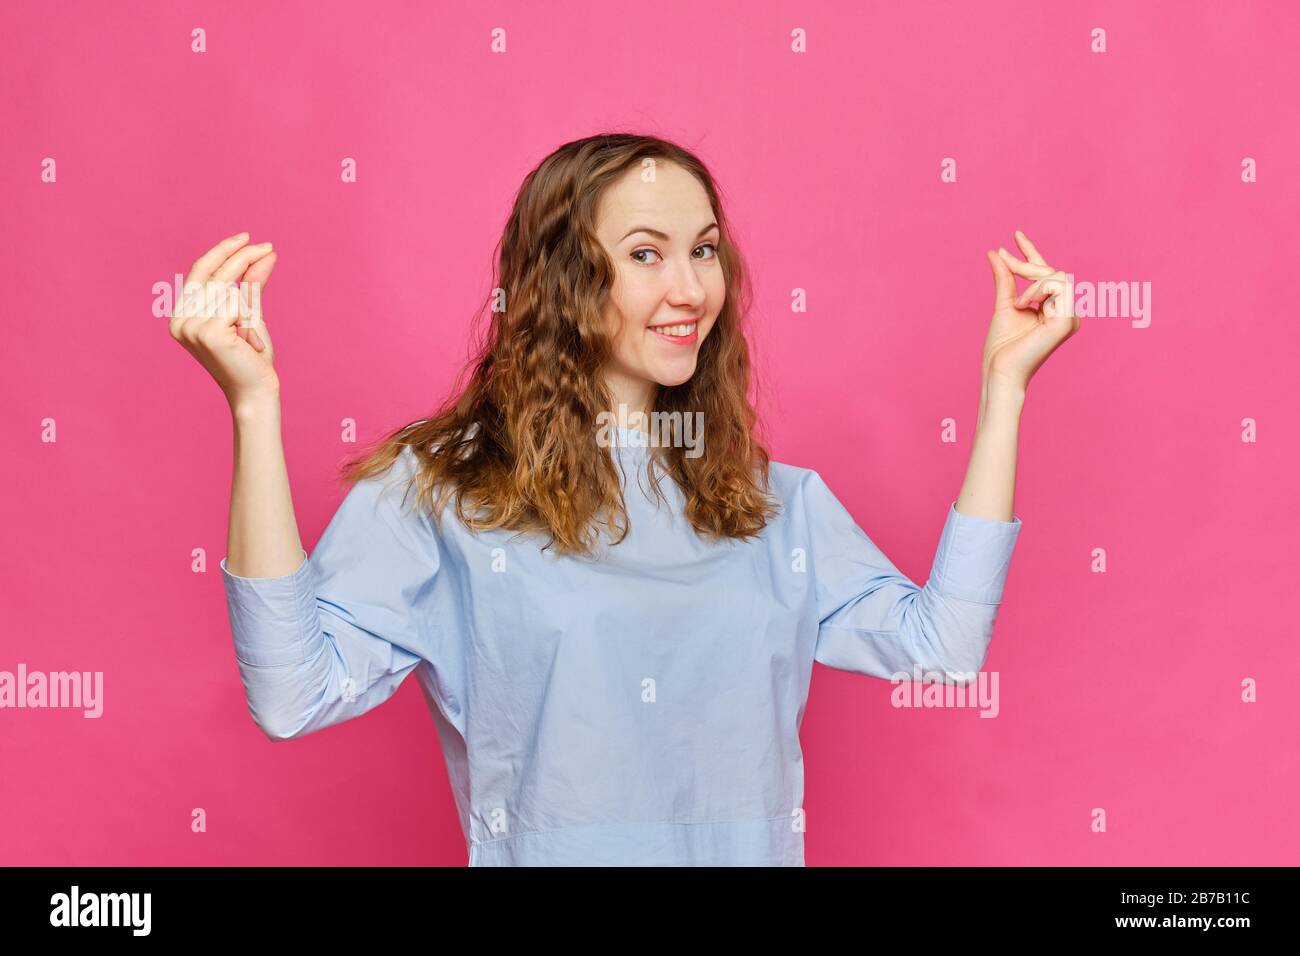 Stylish caucasian girl in a pale blue t-shirt shows a gesture of snapping fingers on a pink background. Close up. Stock Photo